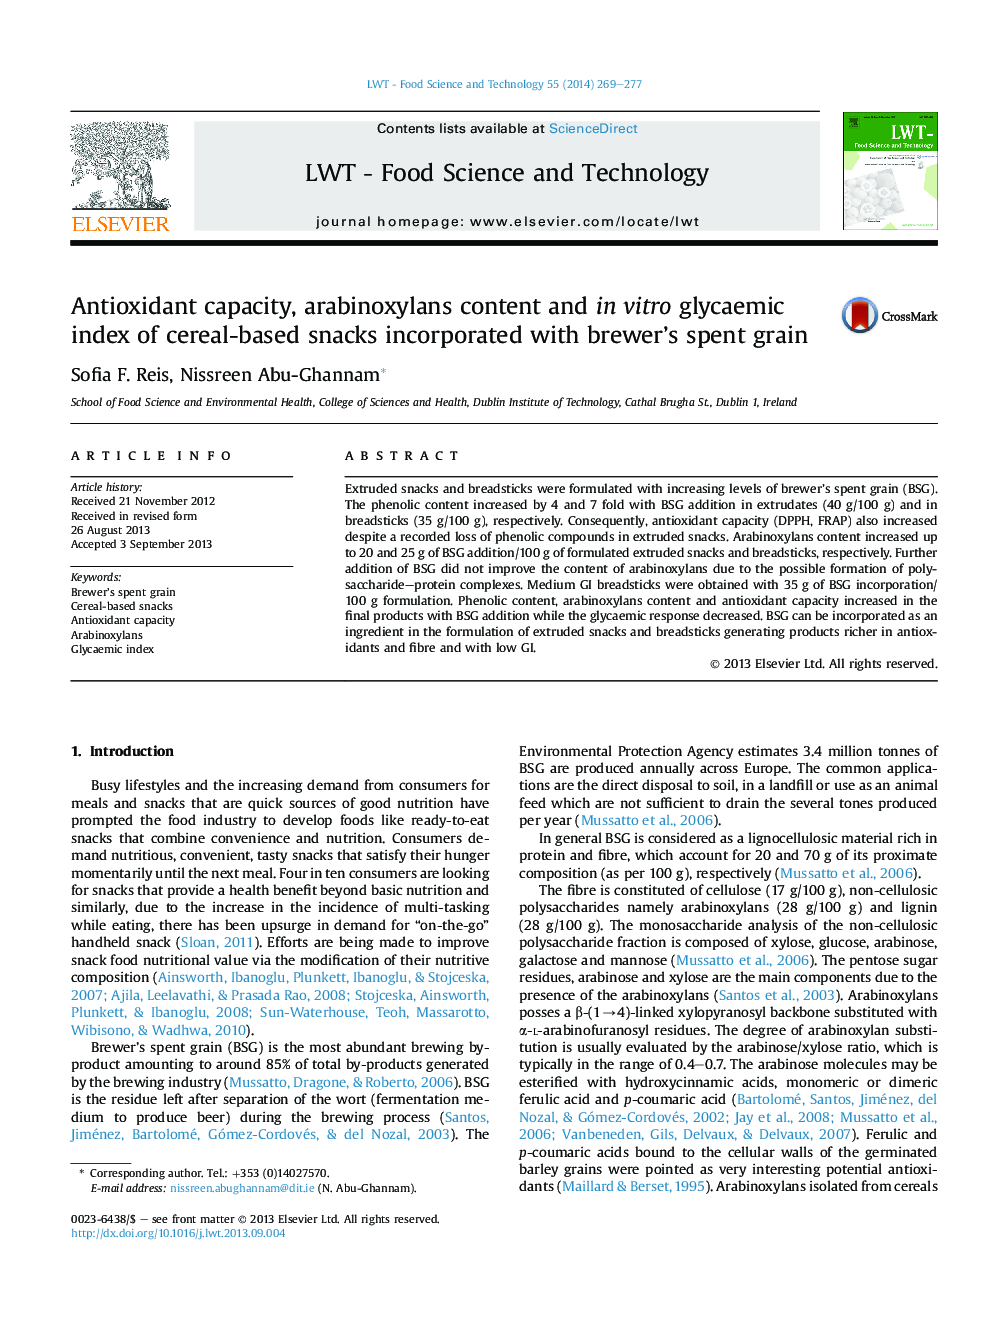 Antioxidant capacity, arabinoxylans content and inÂ vitro glycaemic index of cereal-based snacks incorporated with brewer's spent grain